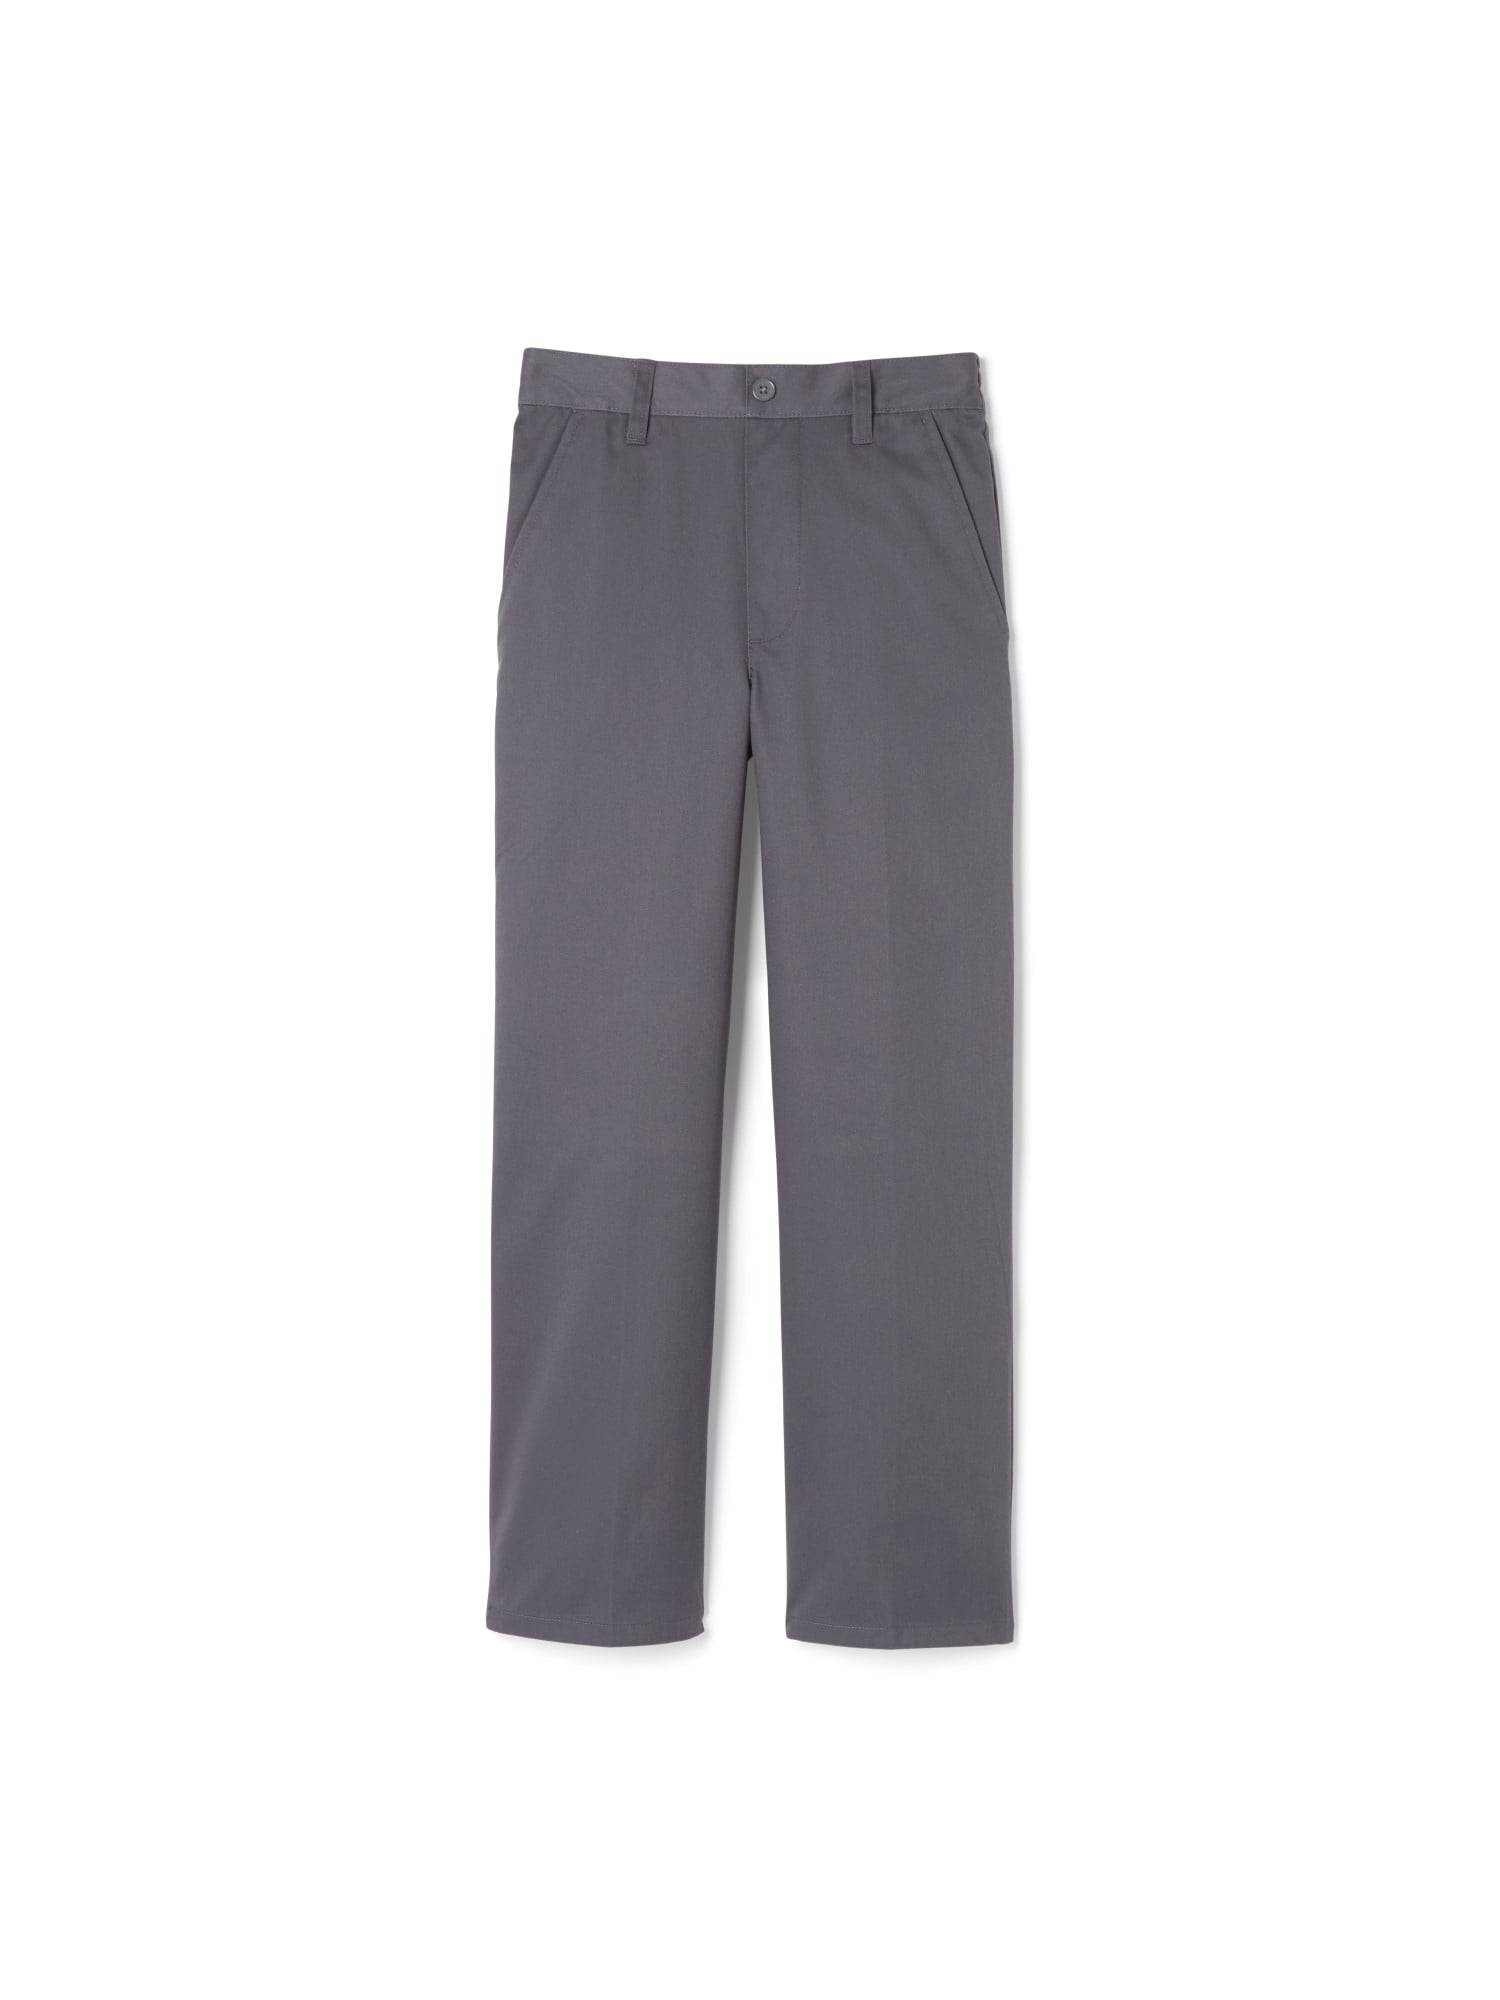 Standard & Husky French Toast Boys Pull-on Relaxed Fit School Uniform Pant